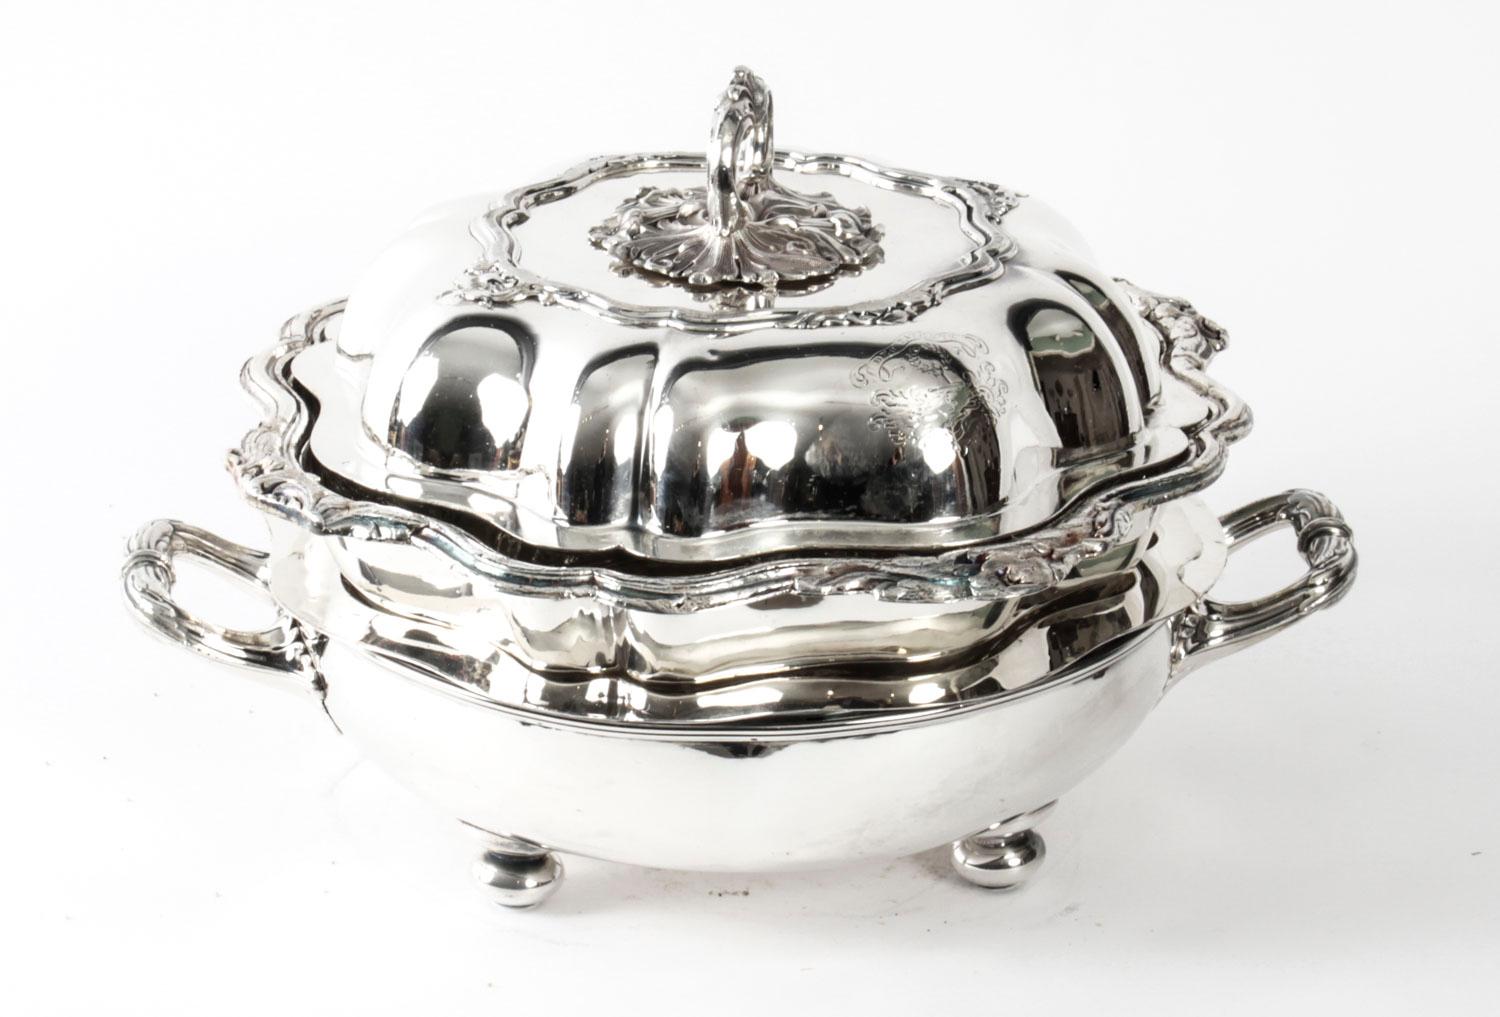 This is an exquisitely high-quality and rare antique set of four English Old Sheffield plate, (silver plate on copper) serving dishes with stands and covers, Circa 1815 in date. 

These stunning shaped circular entree dishes each with circular